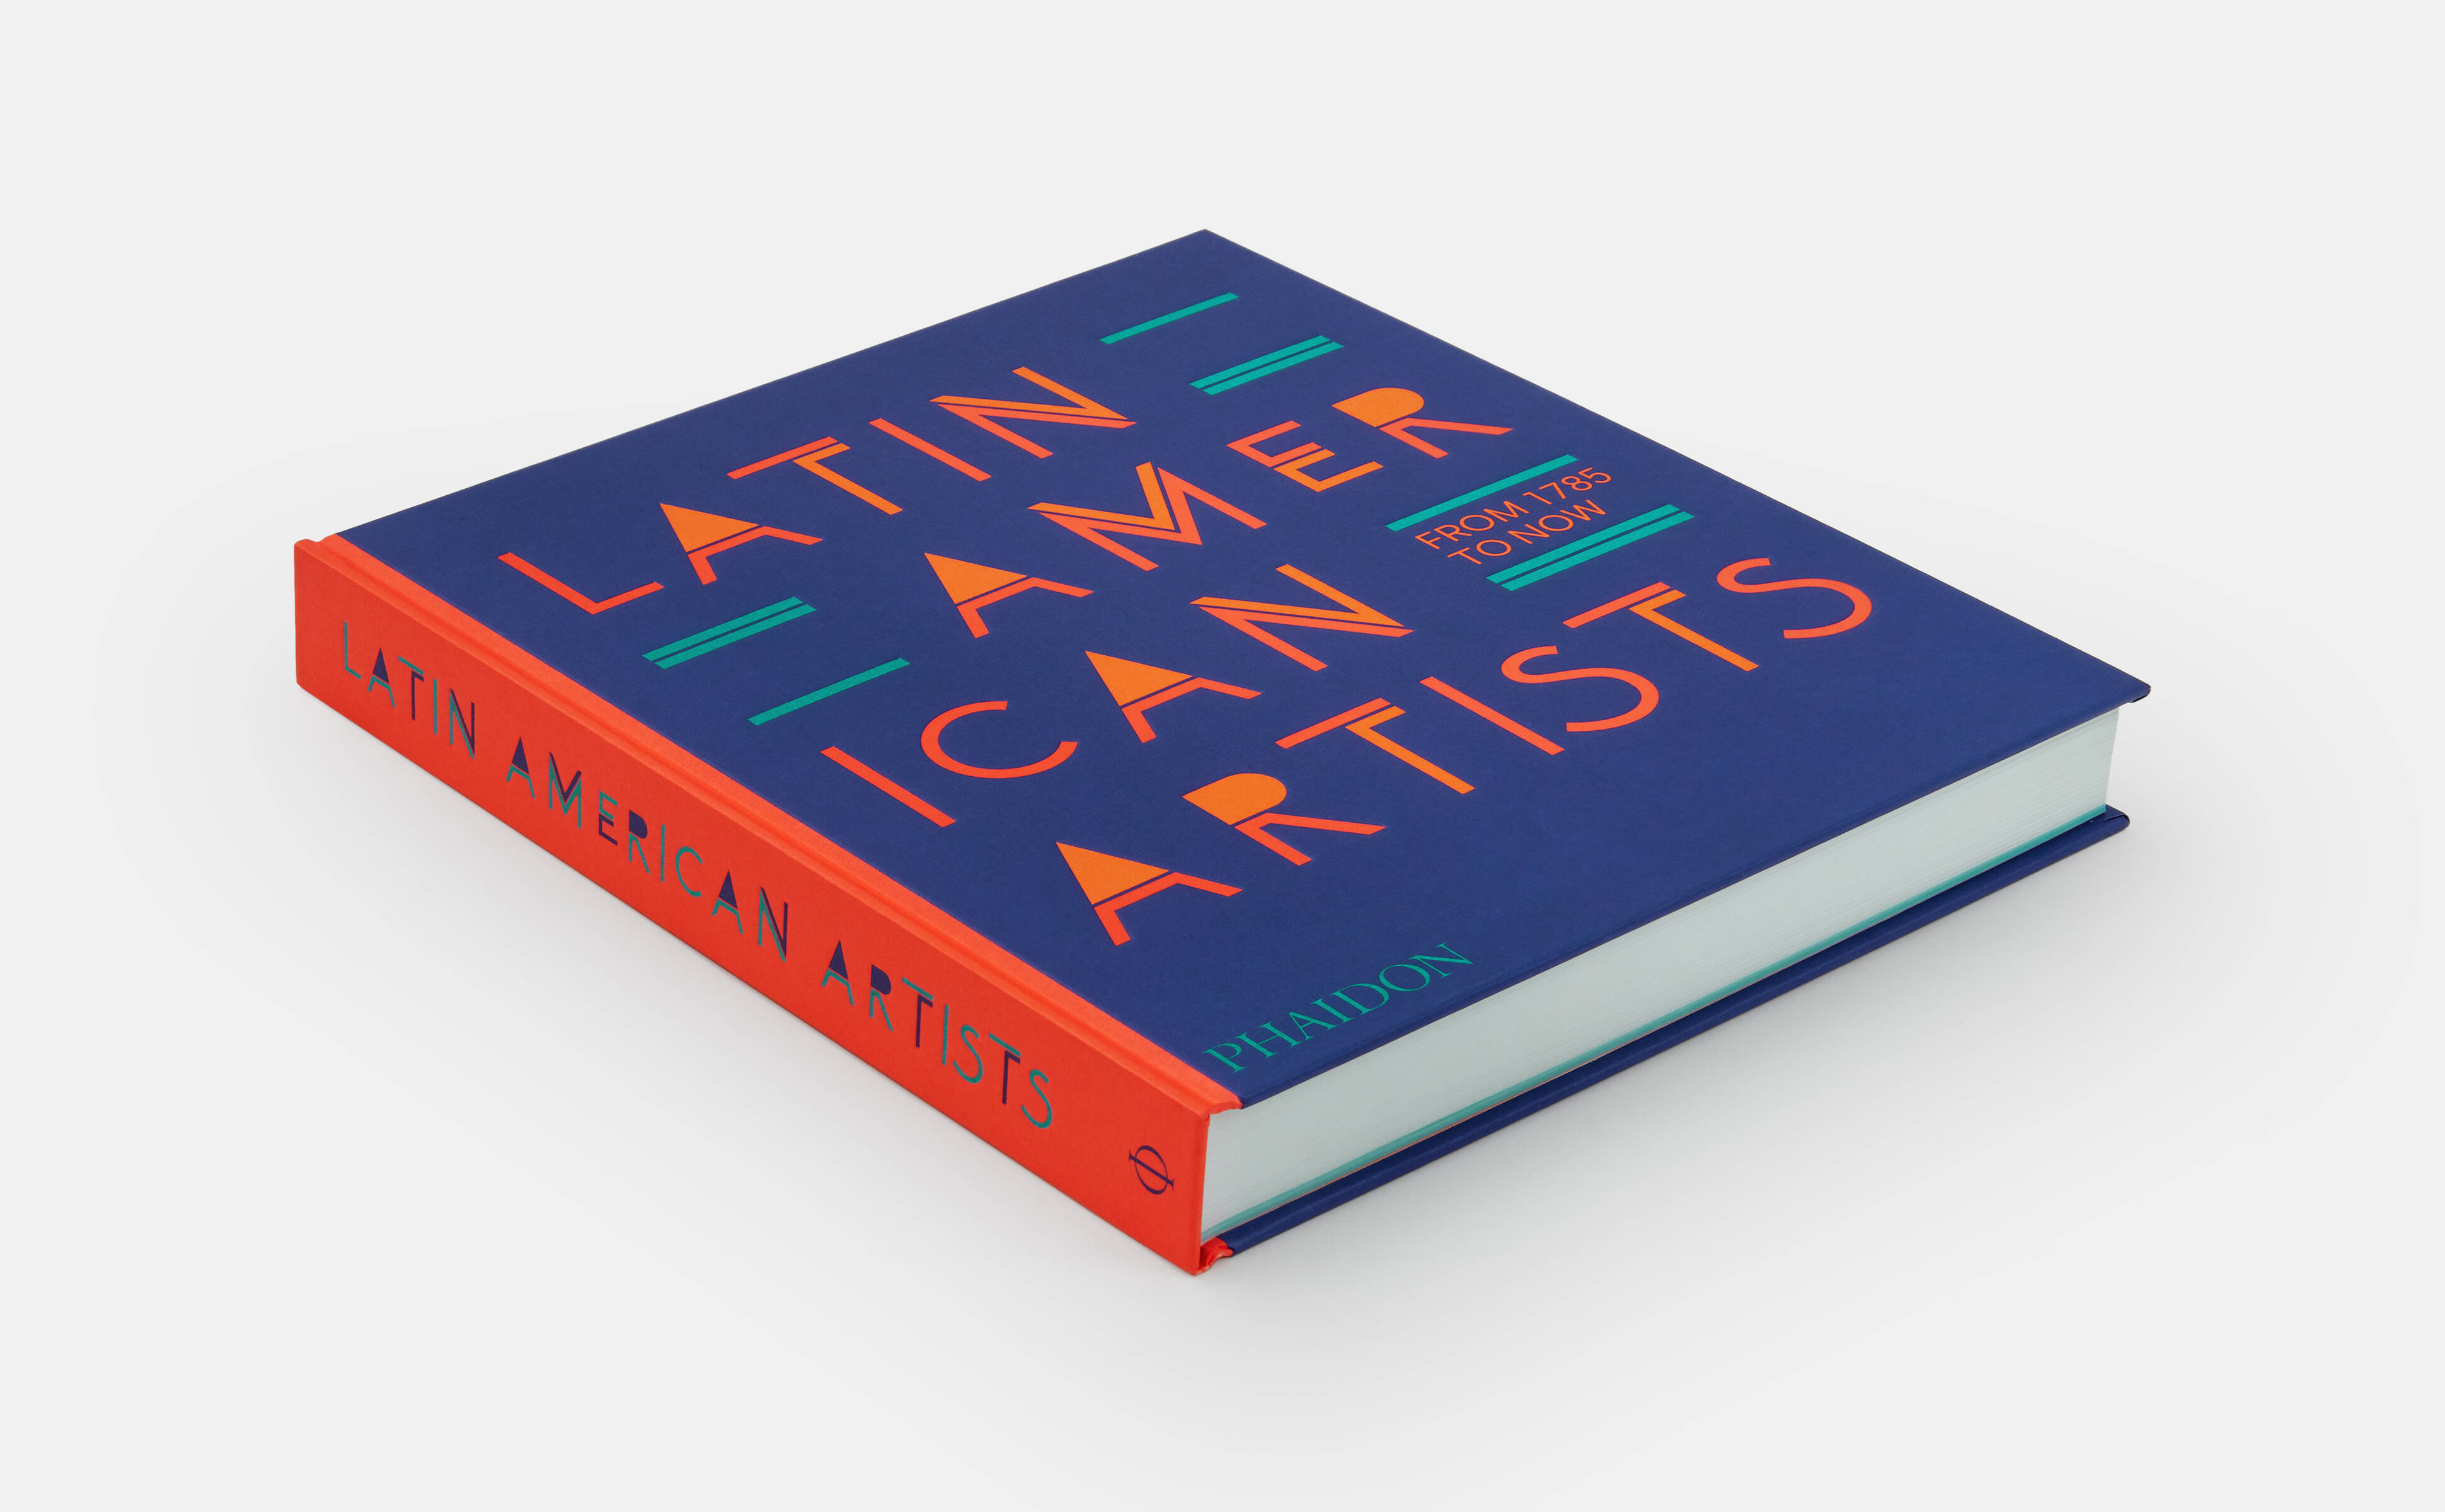 Latin American Artists and Sexuality